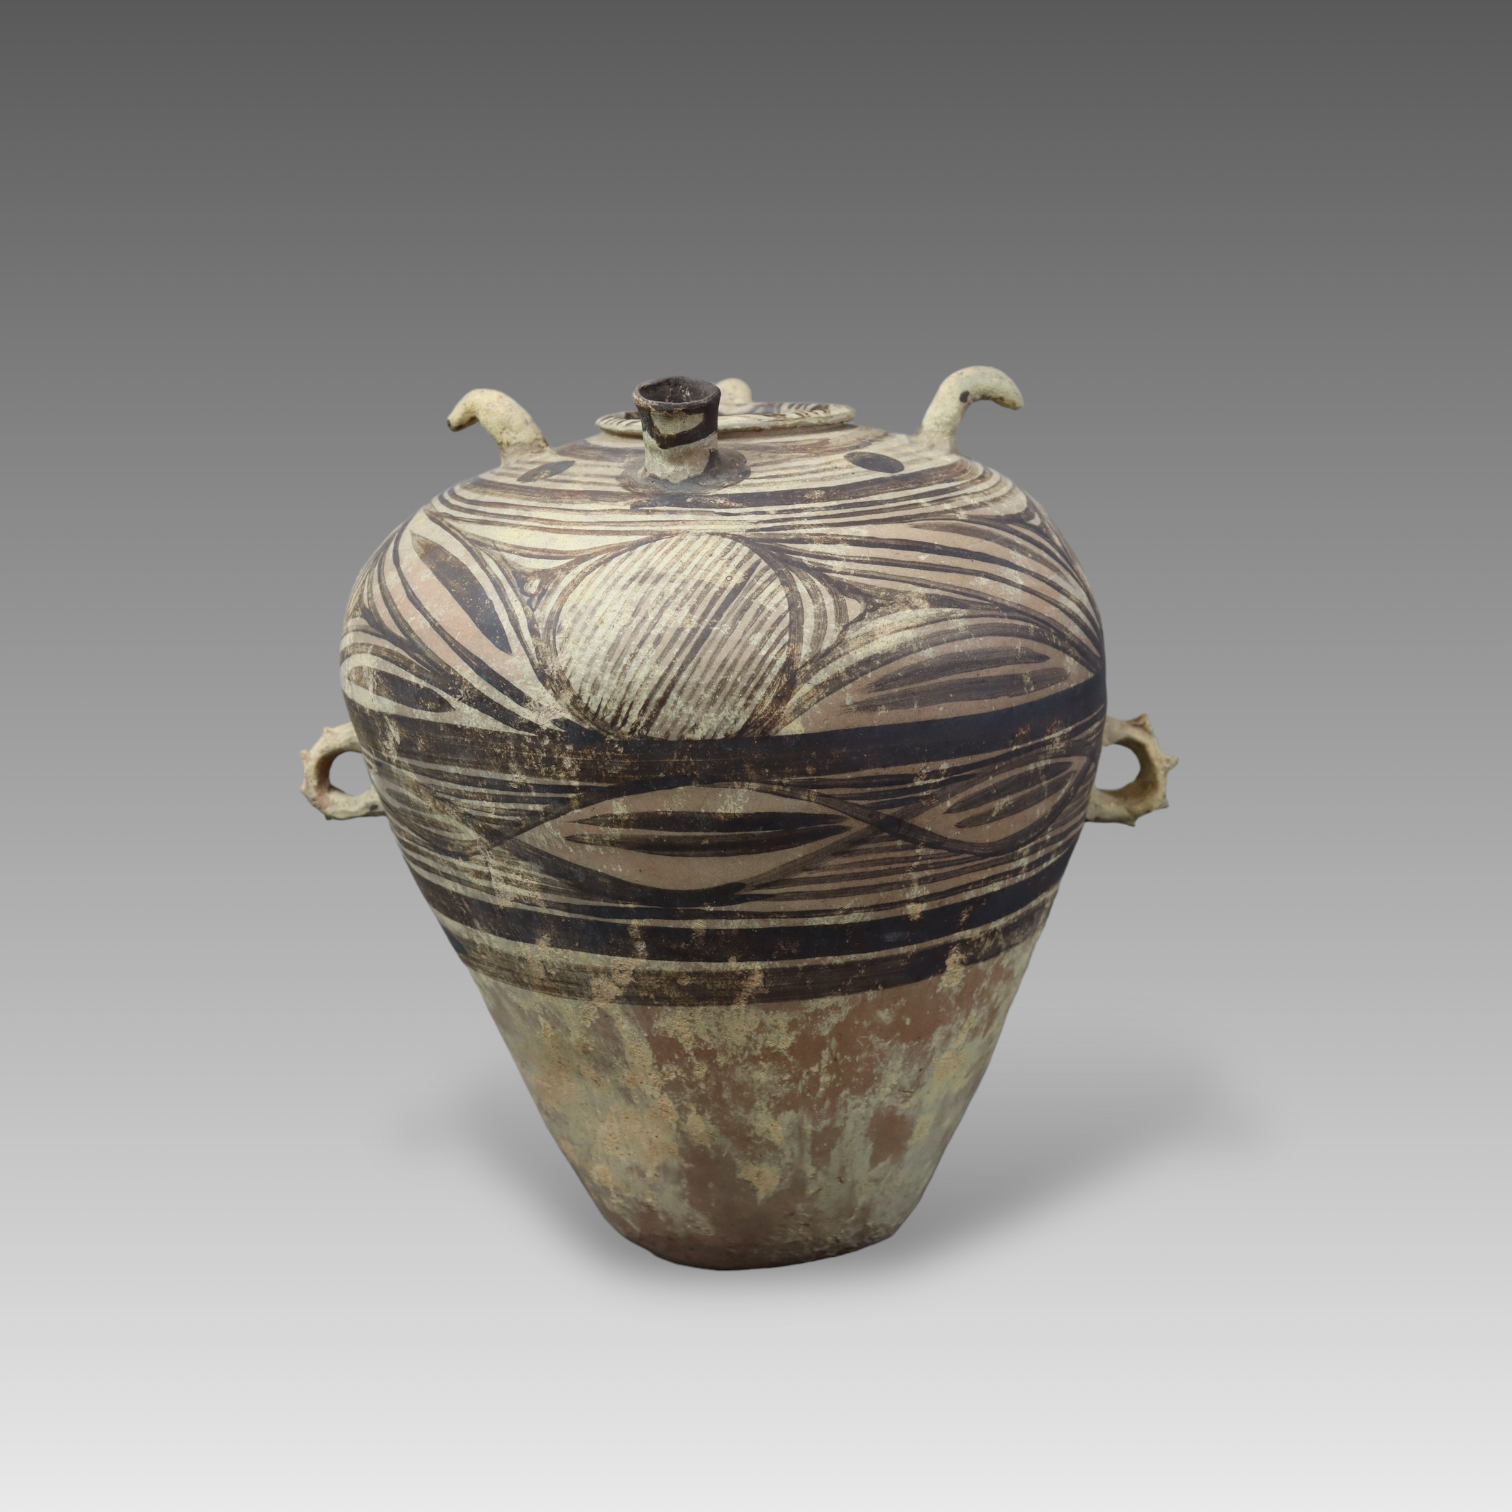 A Painted Pottery Jar, Majiayao cultureA painted pottery storage jar, Late Neolithic period,